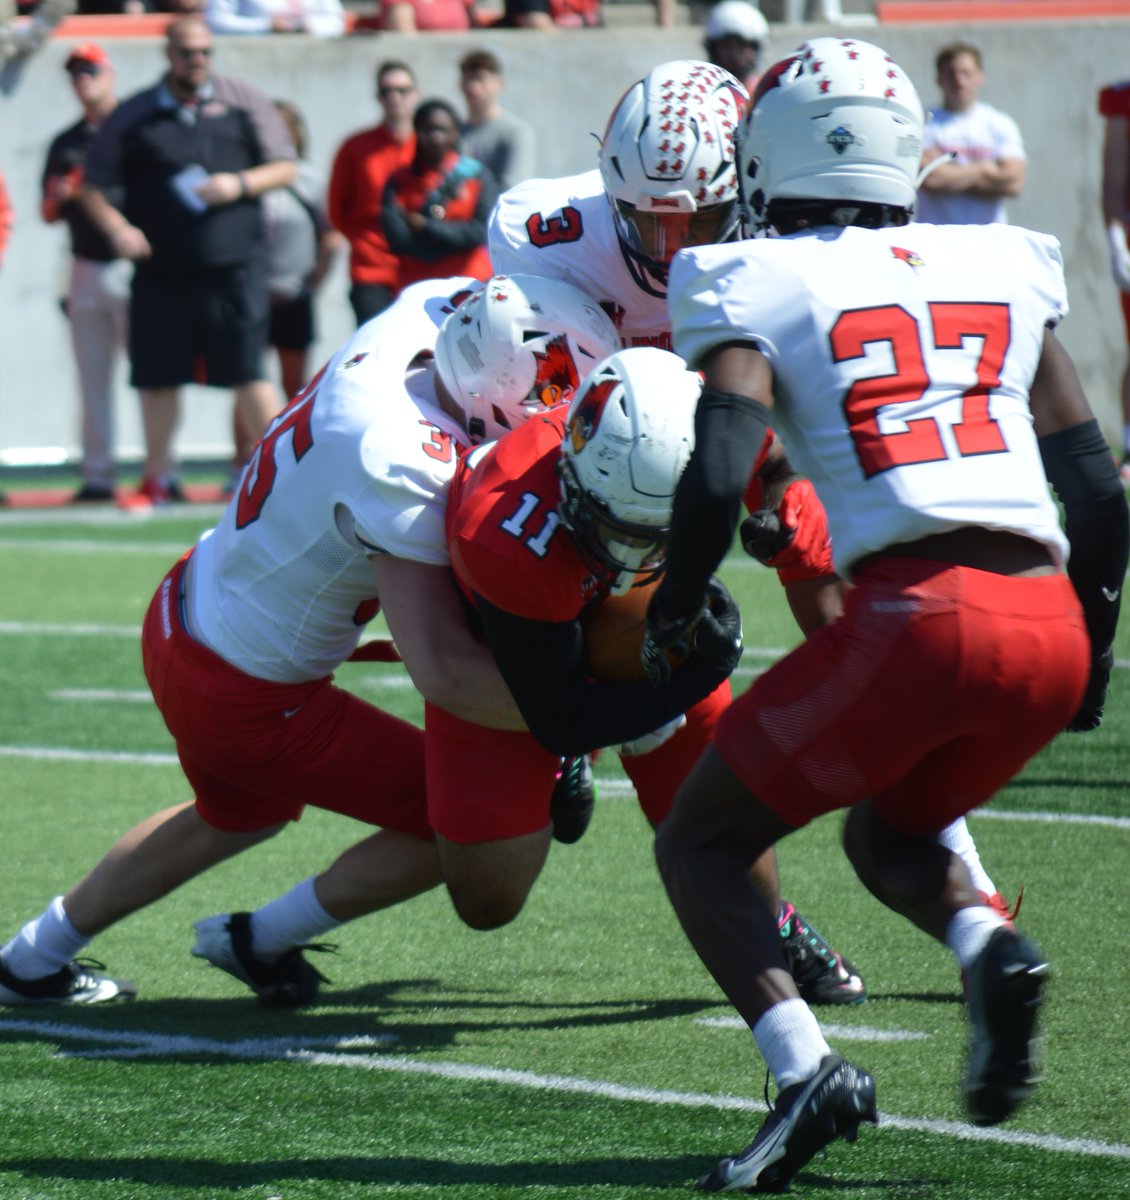 Scenes from Saturday's Illinois State football spring game via my camera lens. Follow @PSPigskin to read our stories beginning Monday. (Thanks @JGaines4121 for setting up the group photo.)